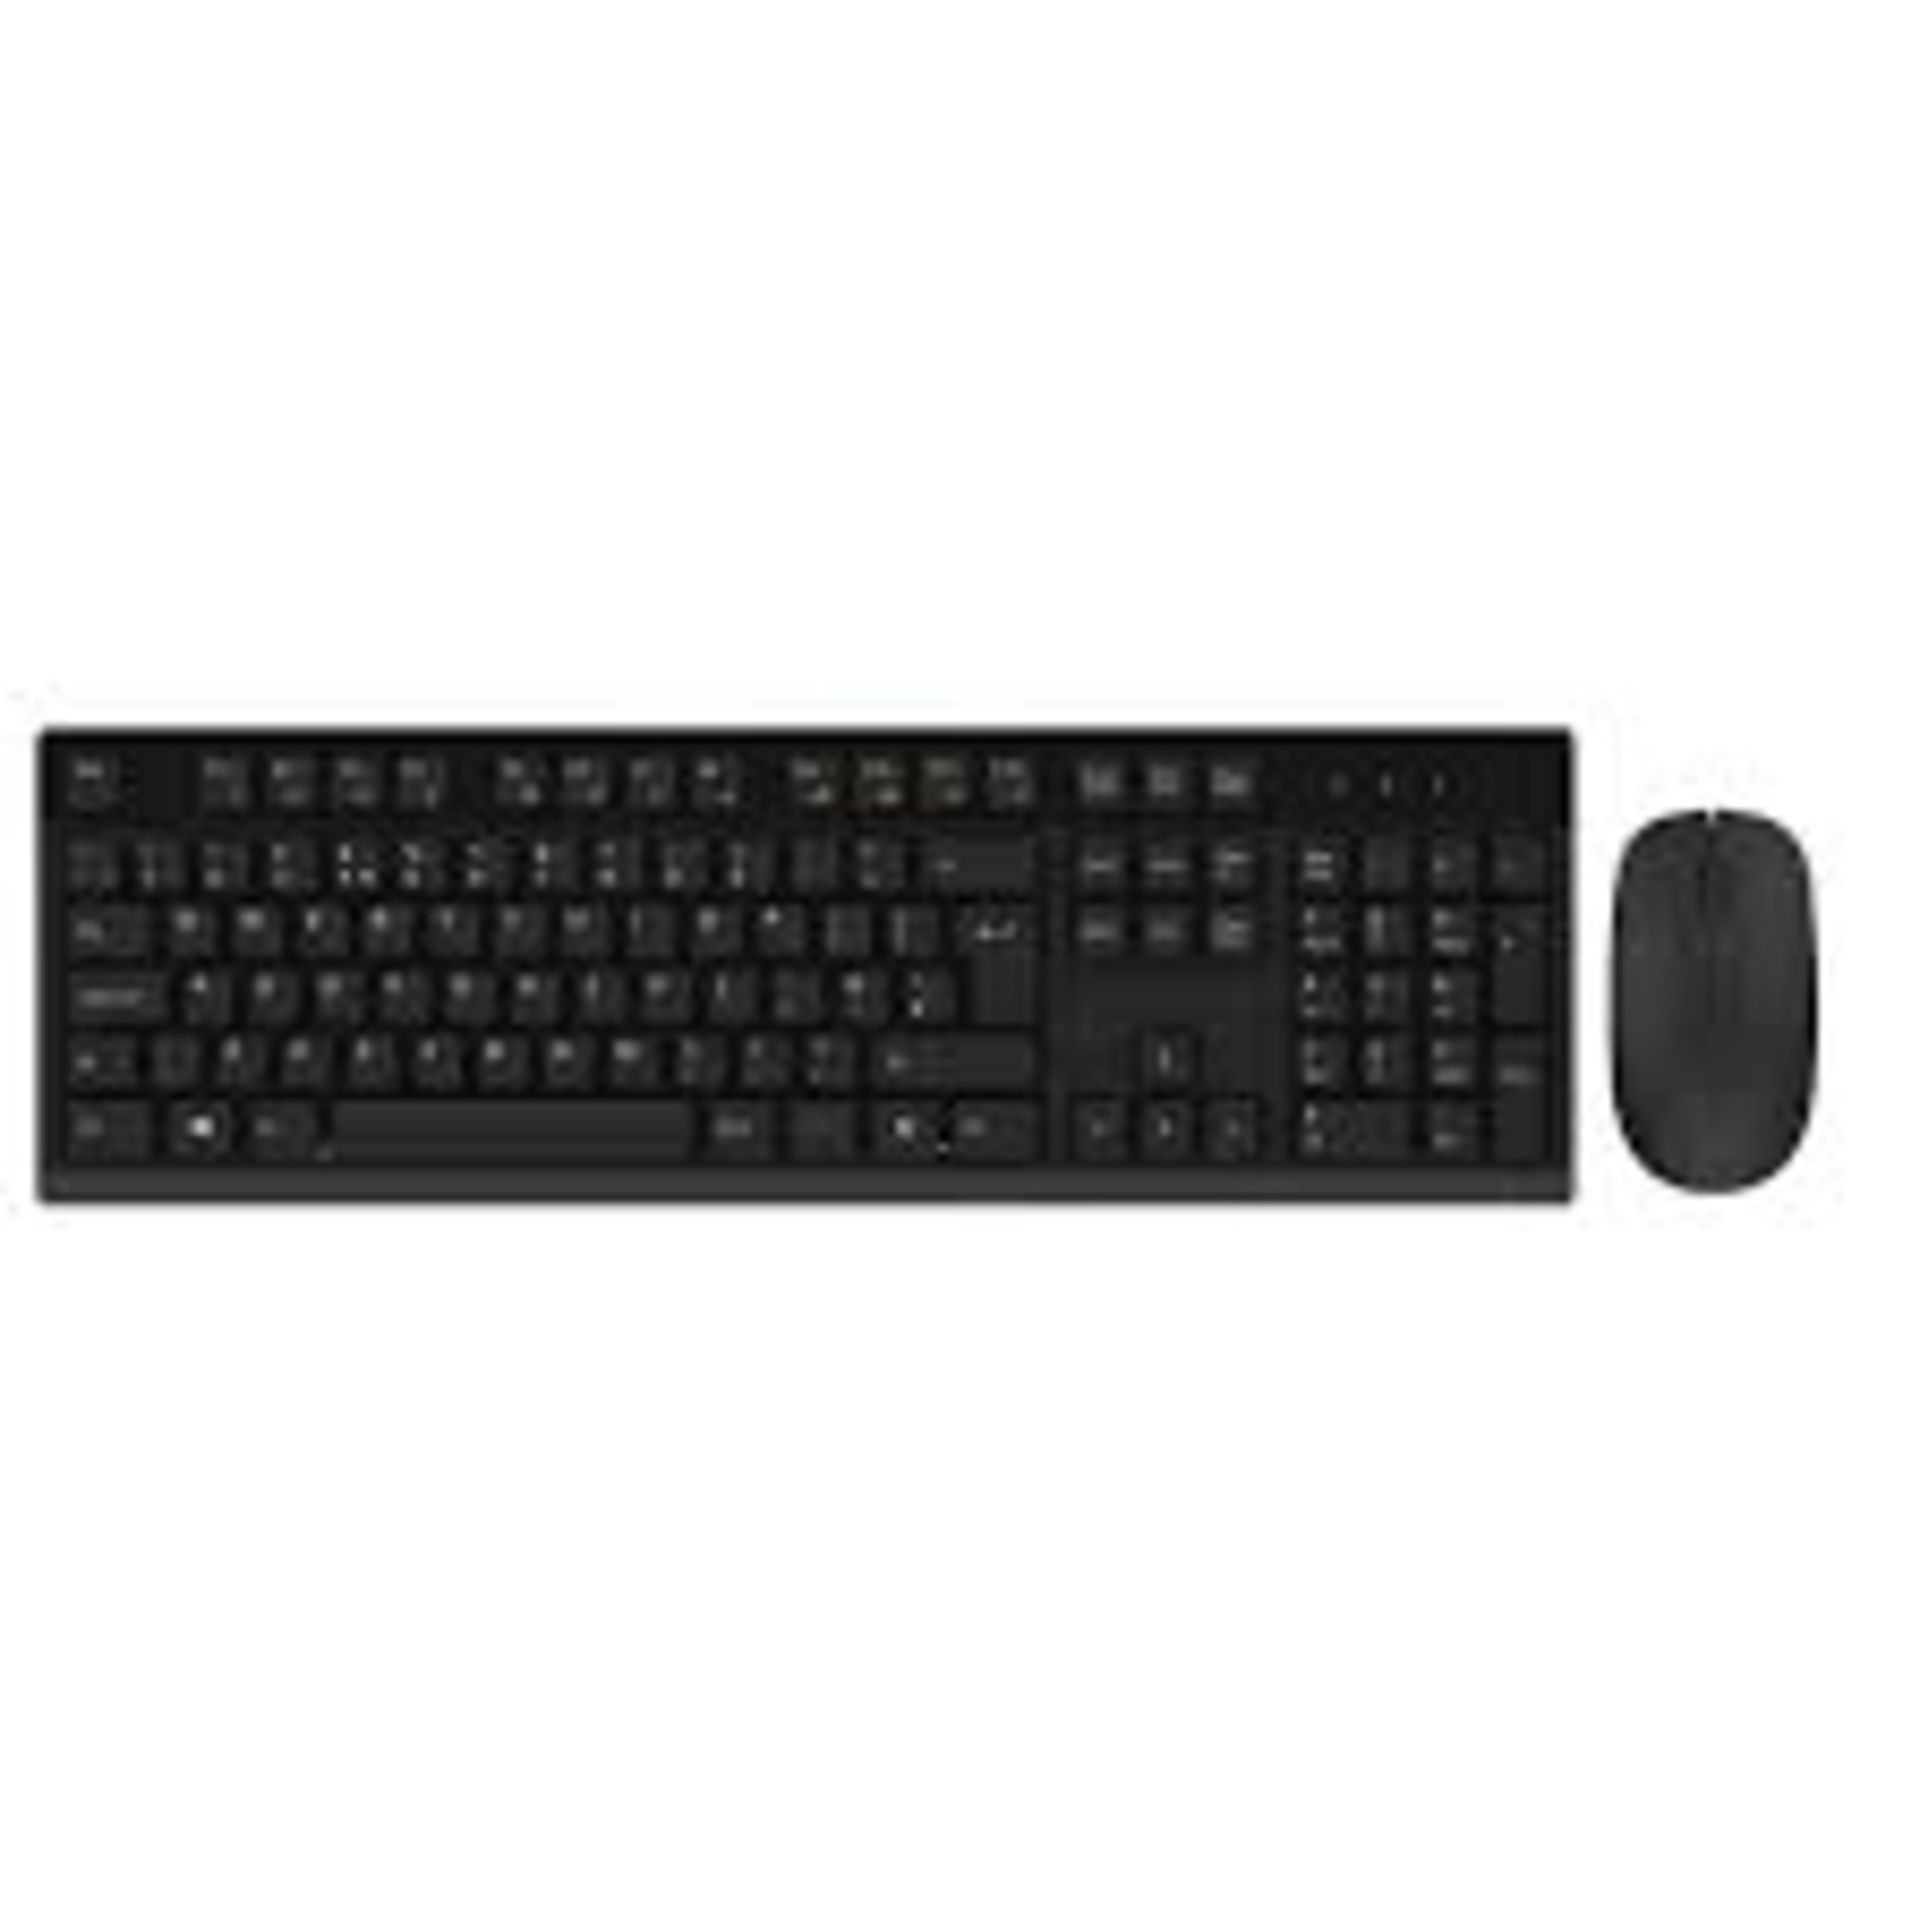 CiT EZ-Touch Wireless Keyboard and Mouse Set - Black. - PW.